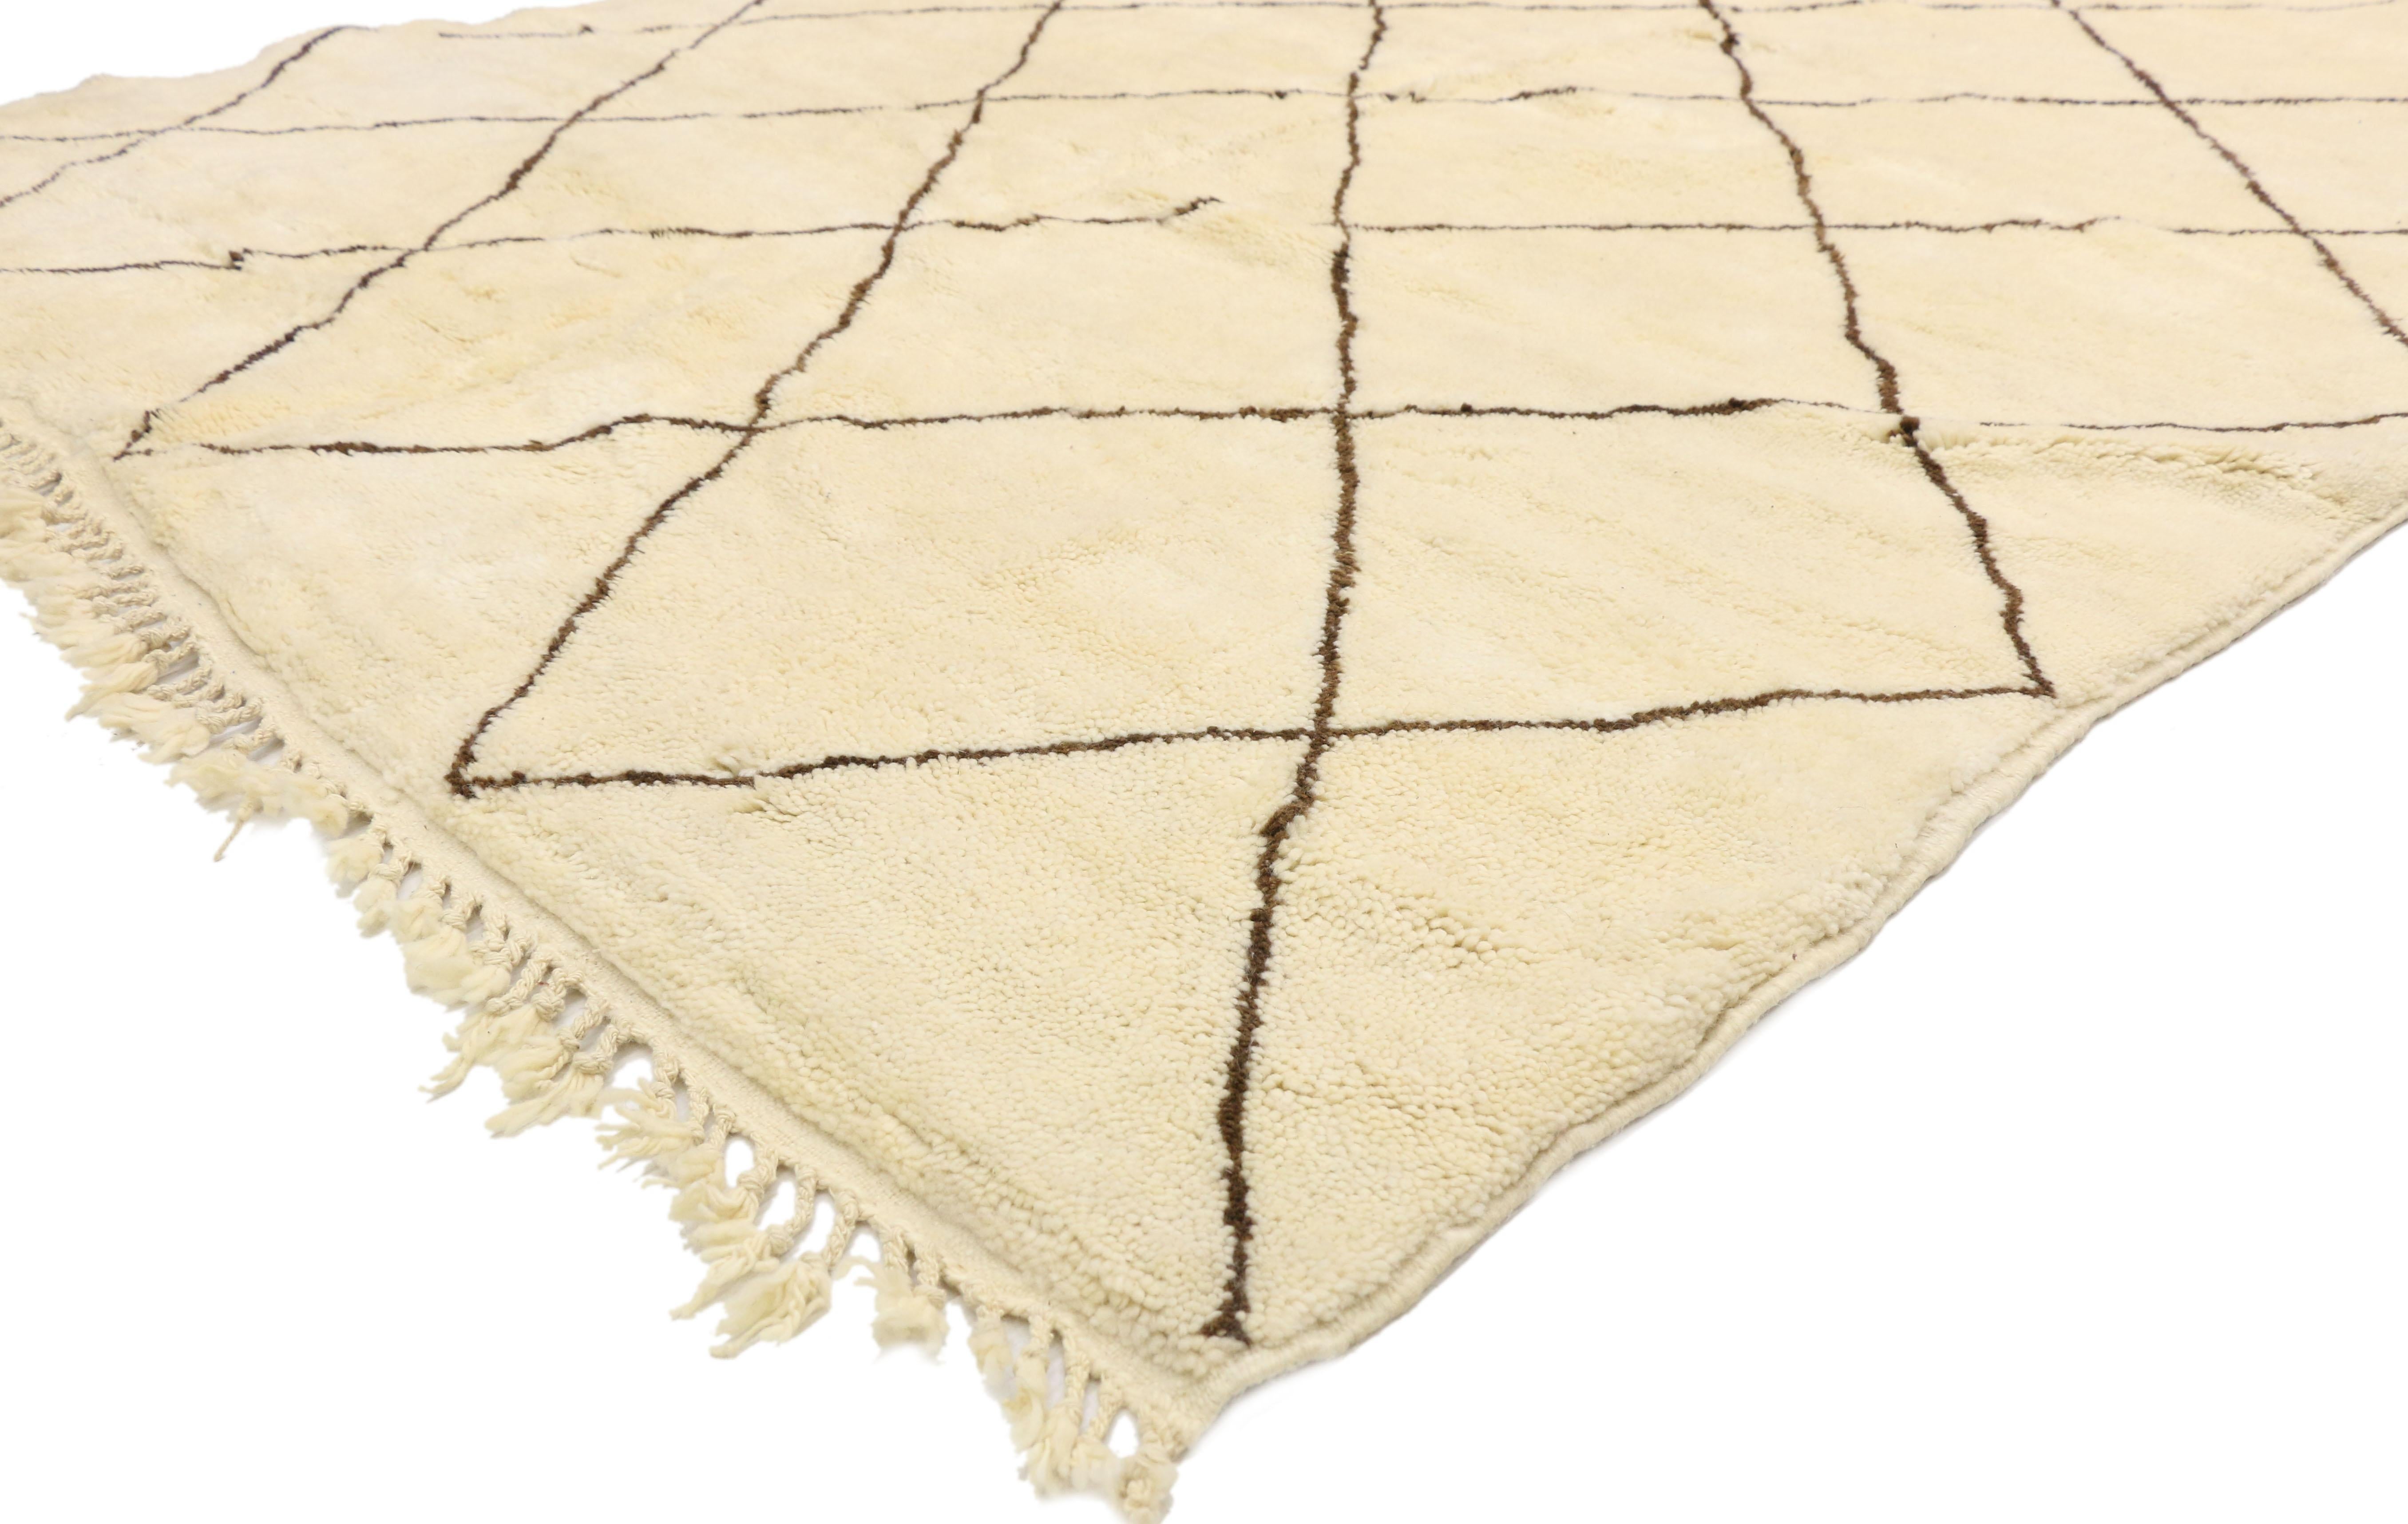 20762 Moroccan Beni Ourain Rug, 07'01 x 09'04.
Minimalist Shibui meets modern Hygge in this hand knotted wool Moroccan Beni Ourain rug. The simplistic diamond trellis design and earthy neutral colors woven into this piece work together to provide a